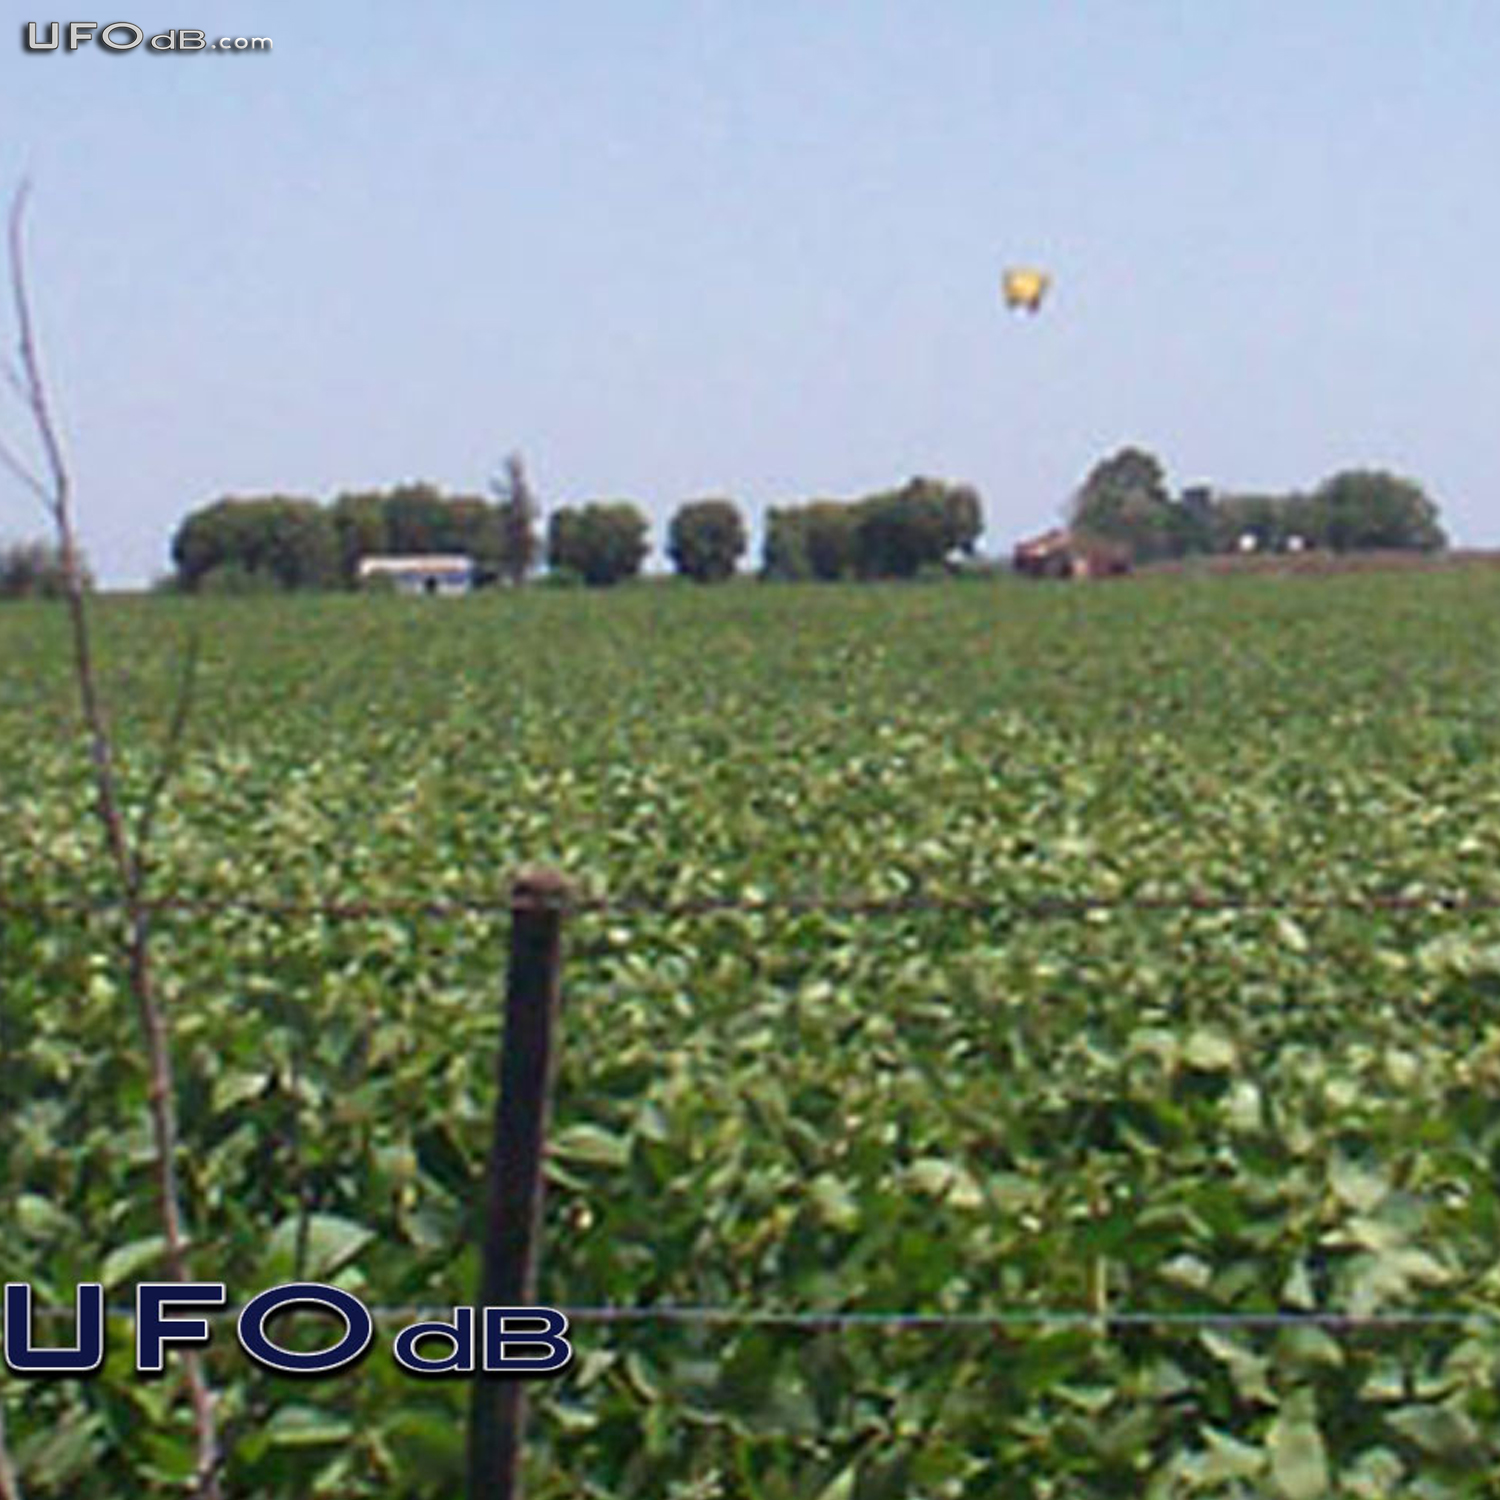 Family in Argentina blames a UFO for their sickness | February 28 2011 UFO Picture #271-2